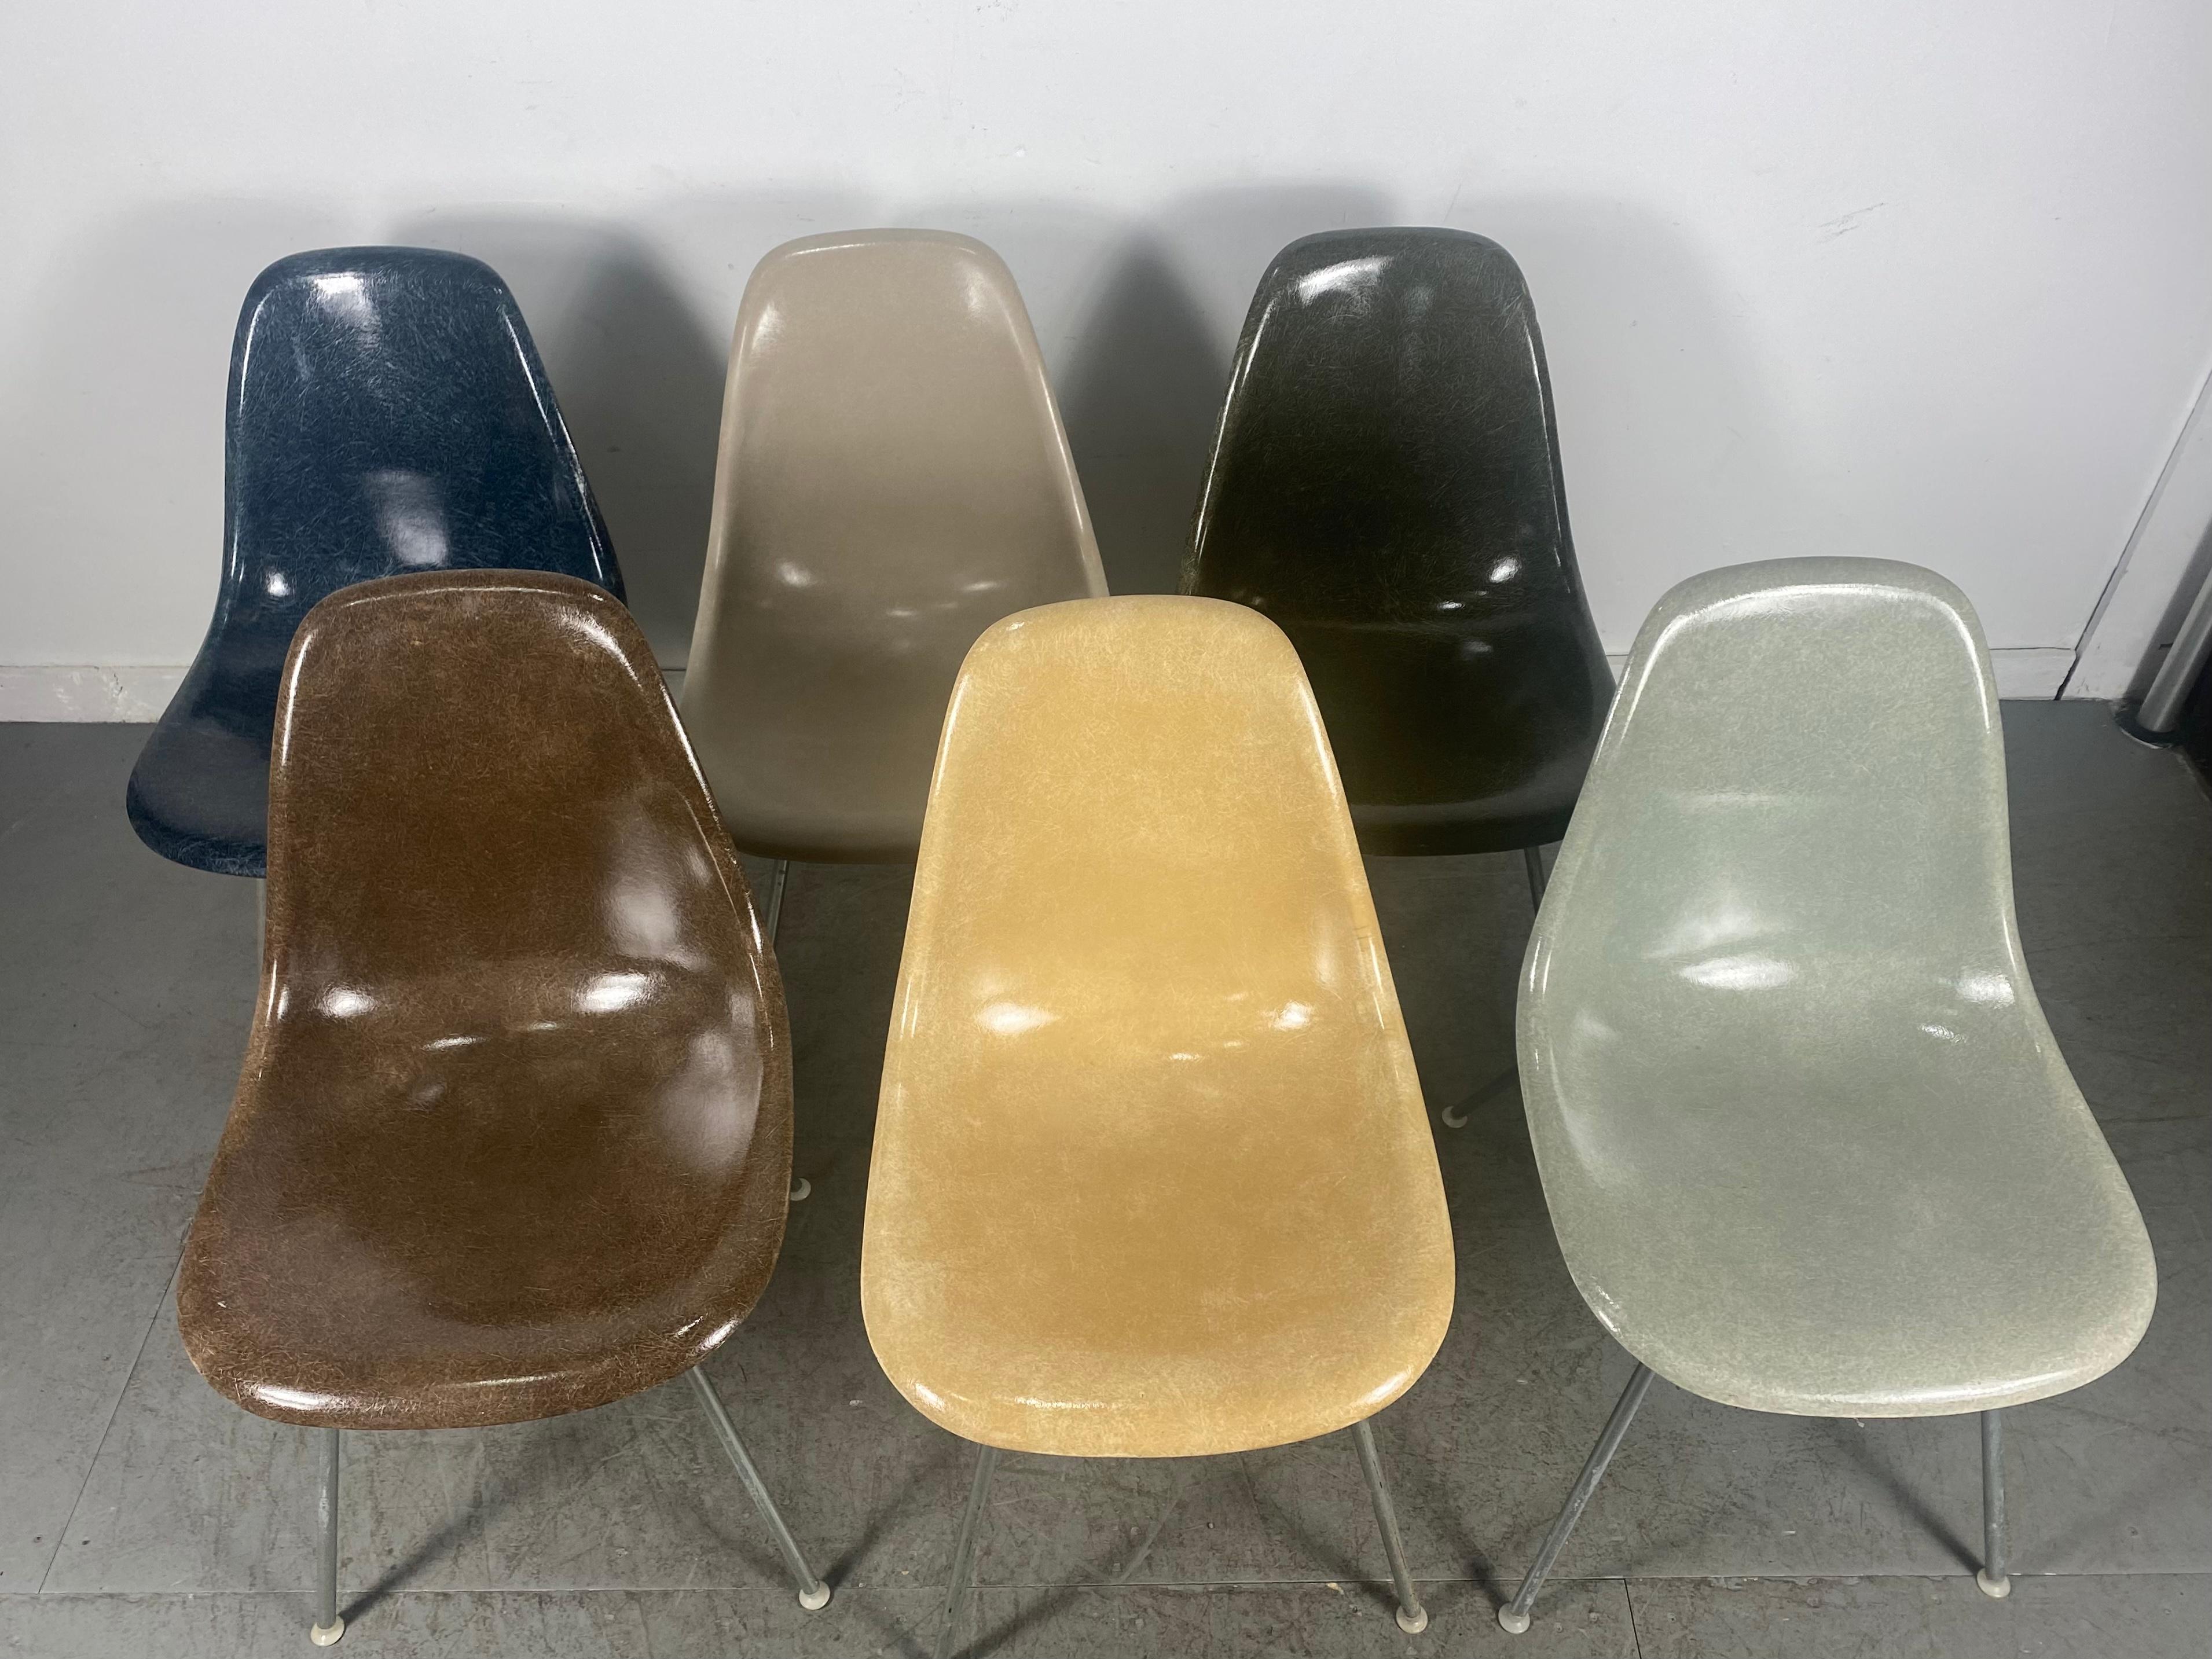 Nice early set of 6 fiberglass side shell chairs designed by Charles and Ray Eames manufactured by Herman Miller, Great colors, rarer, brown, blue, green, Amazing original condition, some retain original 